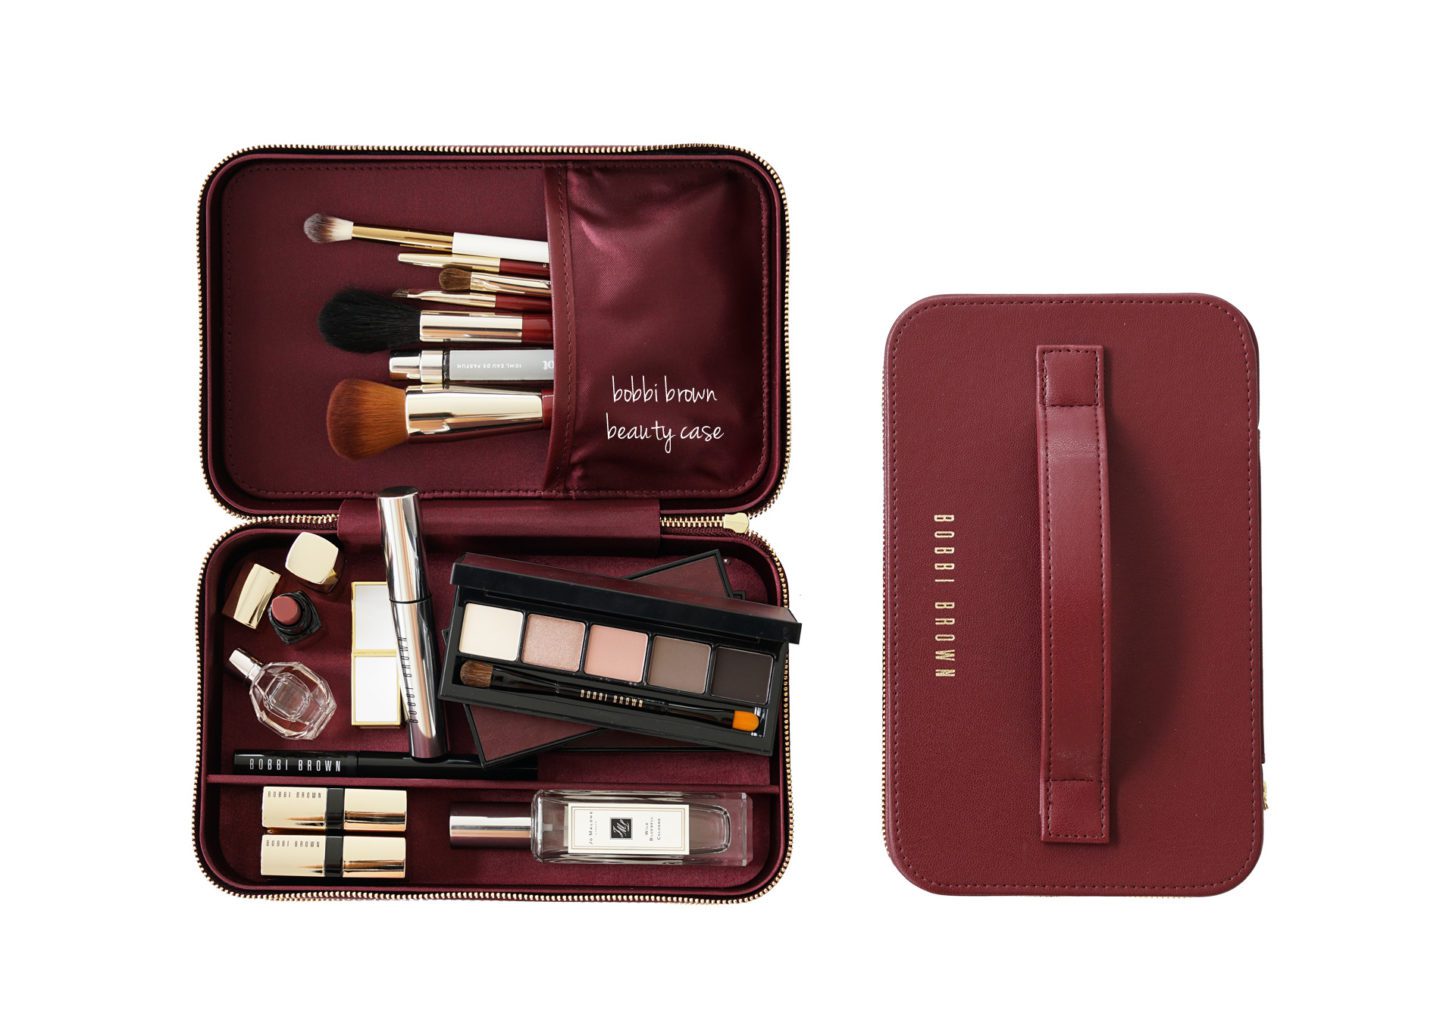 Bobbi Brown Beauty Case Review | The Beauty Look Book